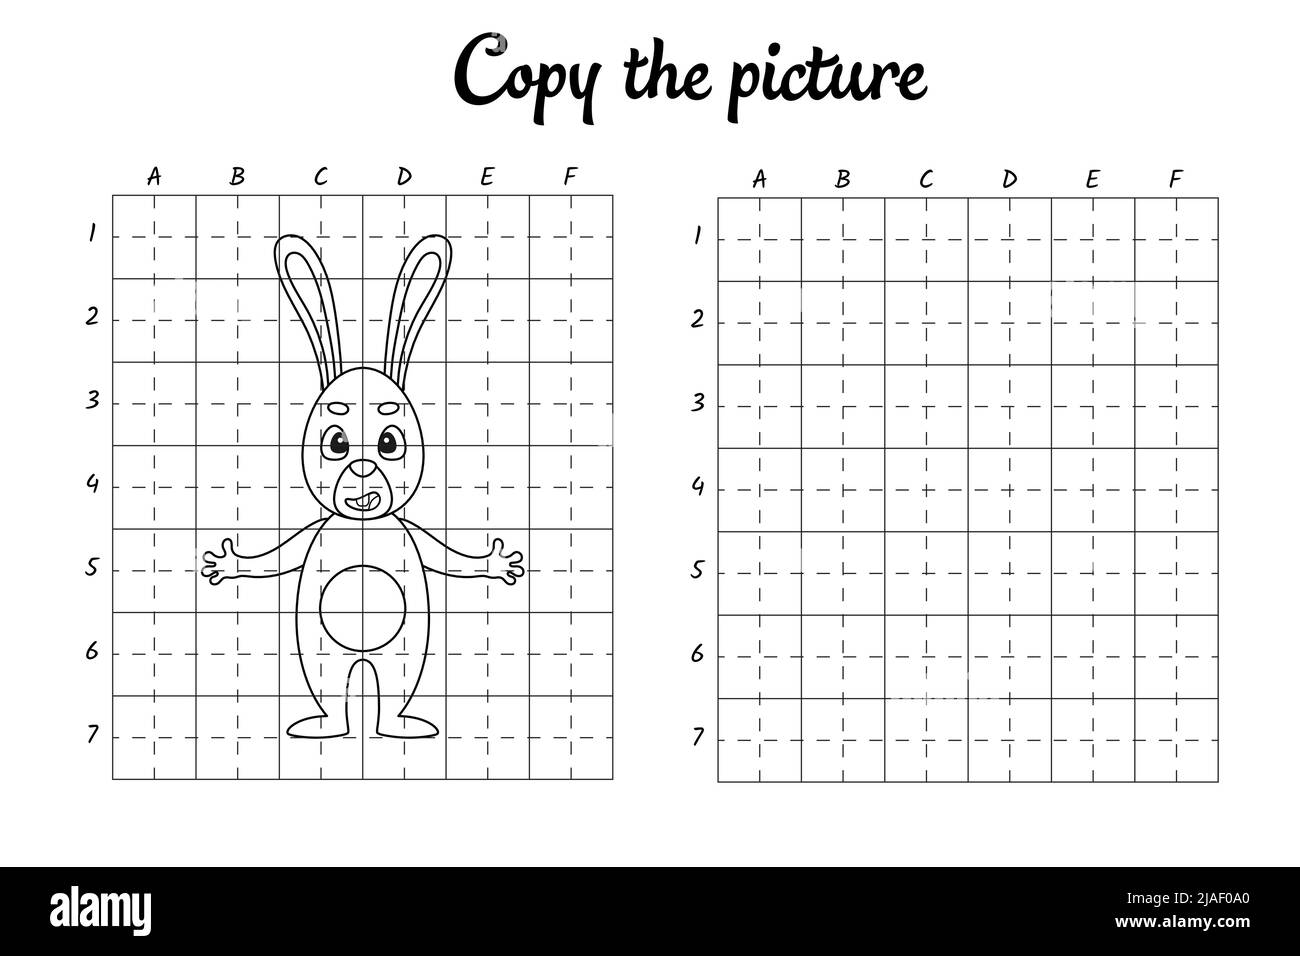 Copy the picture. Draw by grid. Coloring book pages for kids. Handwriting practice, drawing skills training. Education developing printable worksheet. Stock Vector